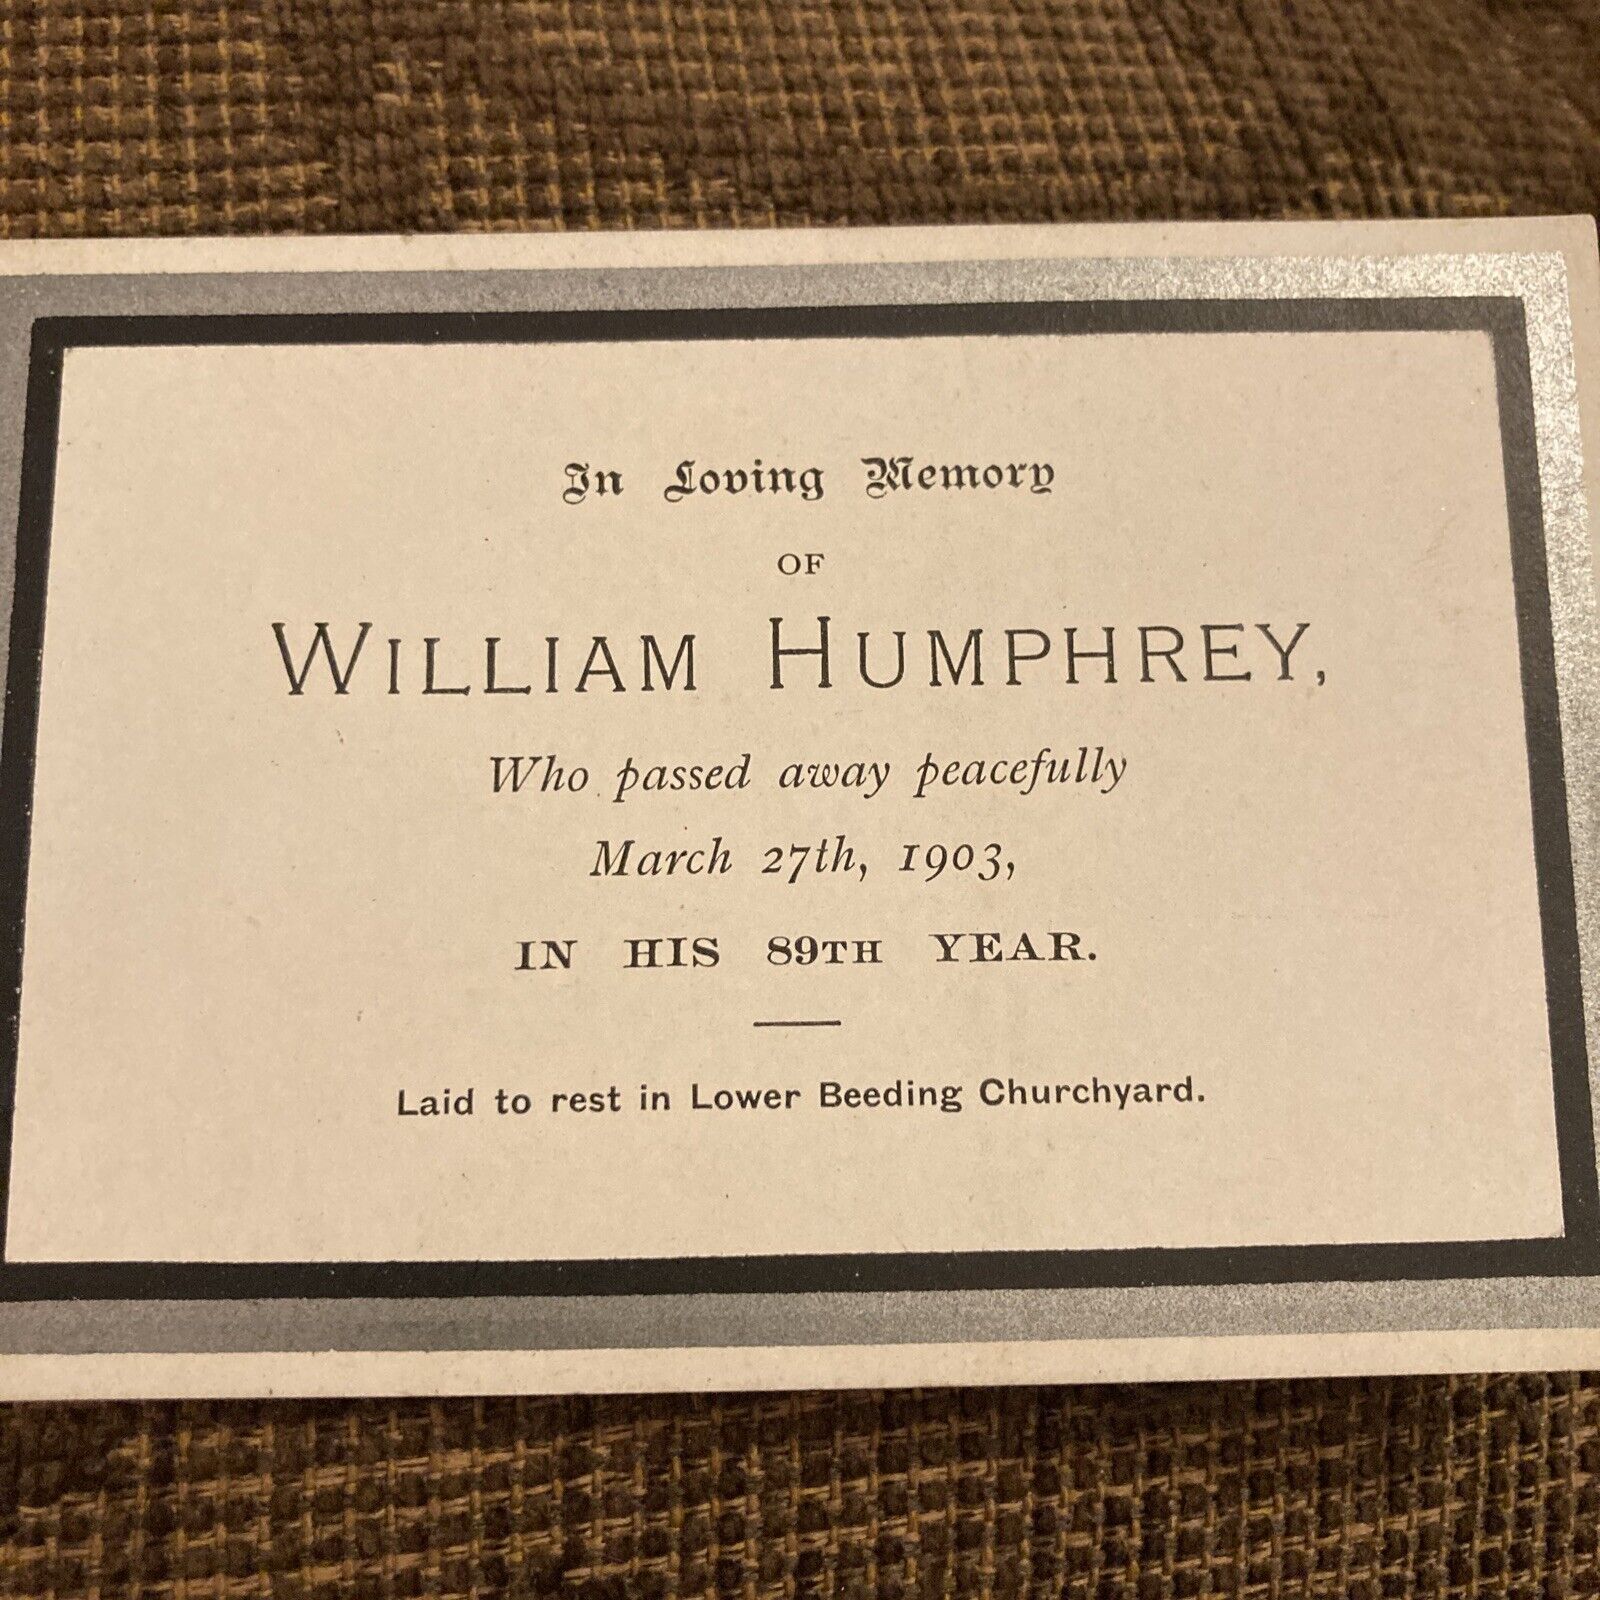 1903 Funeral Mourning Card - William Humphrey, Lower Beeding